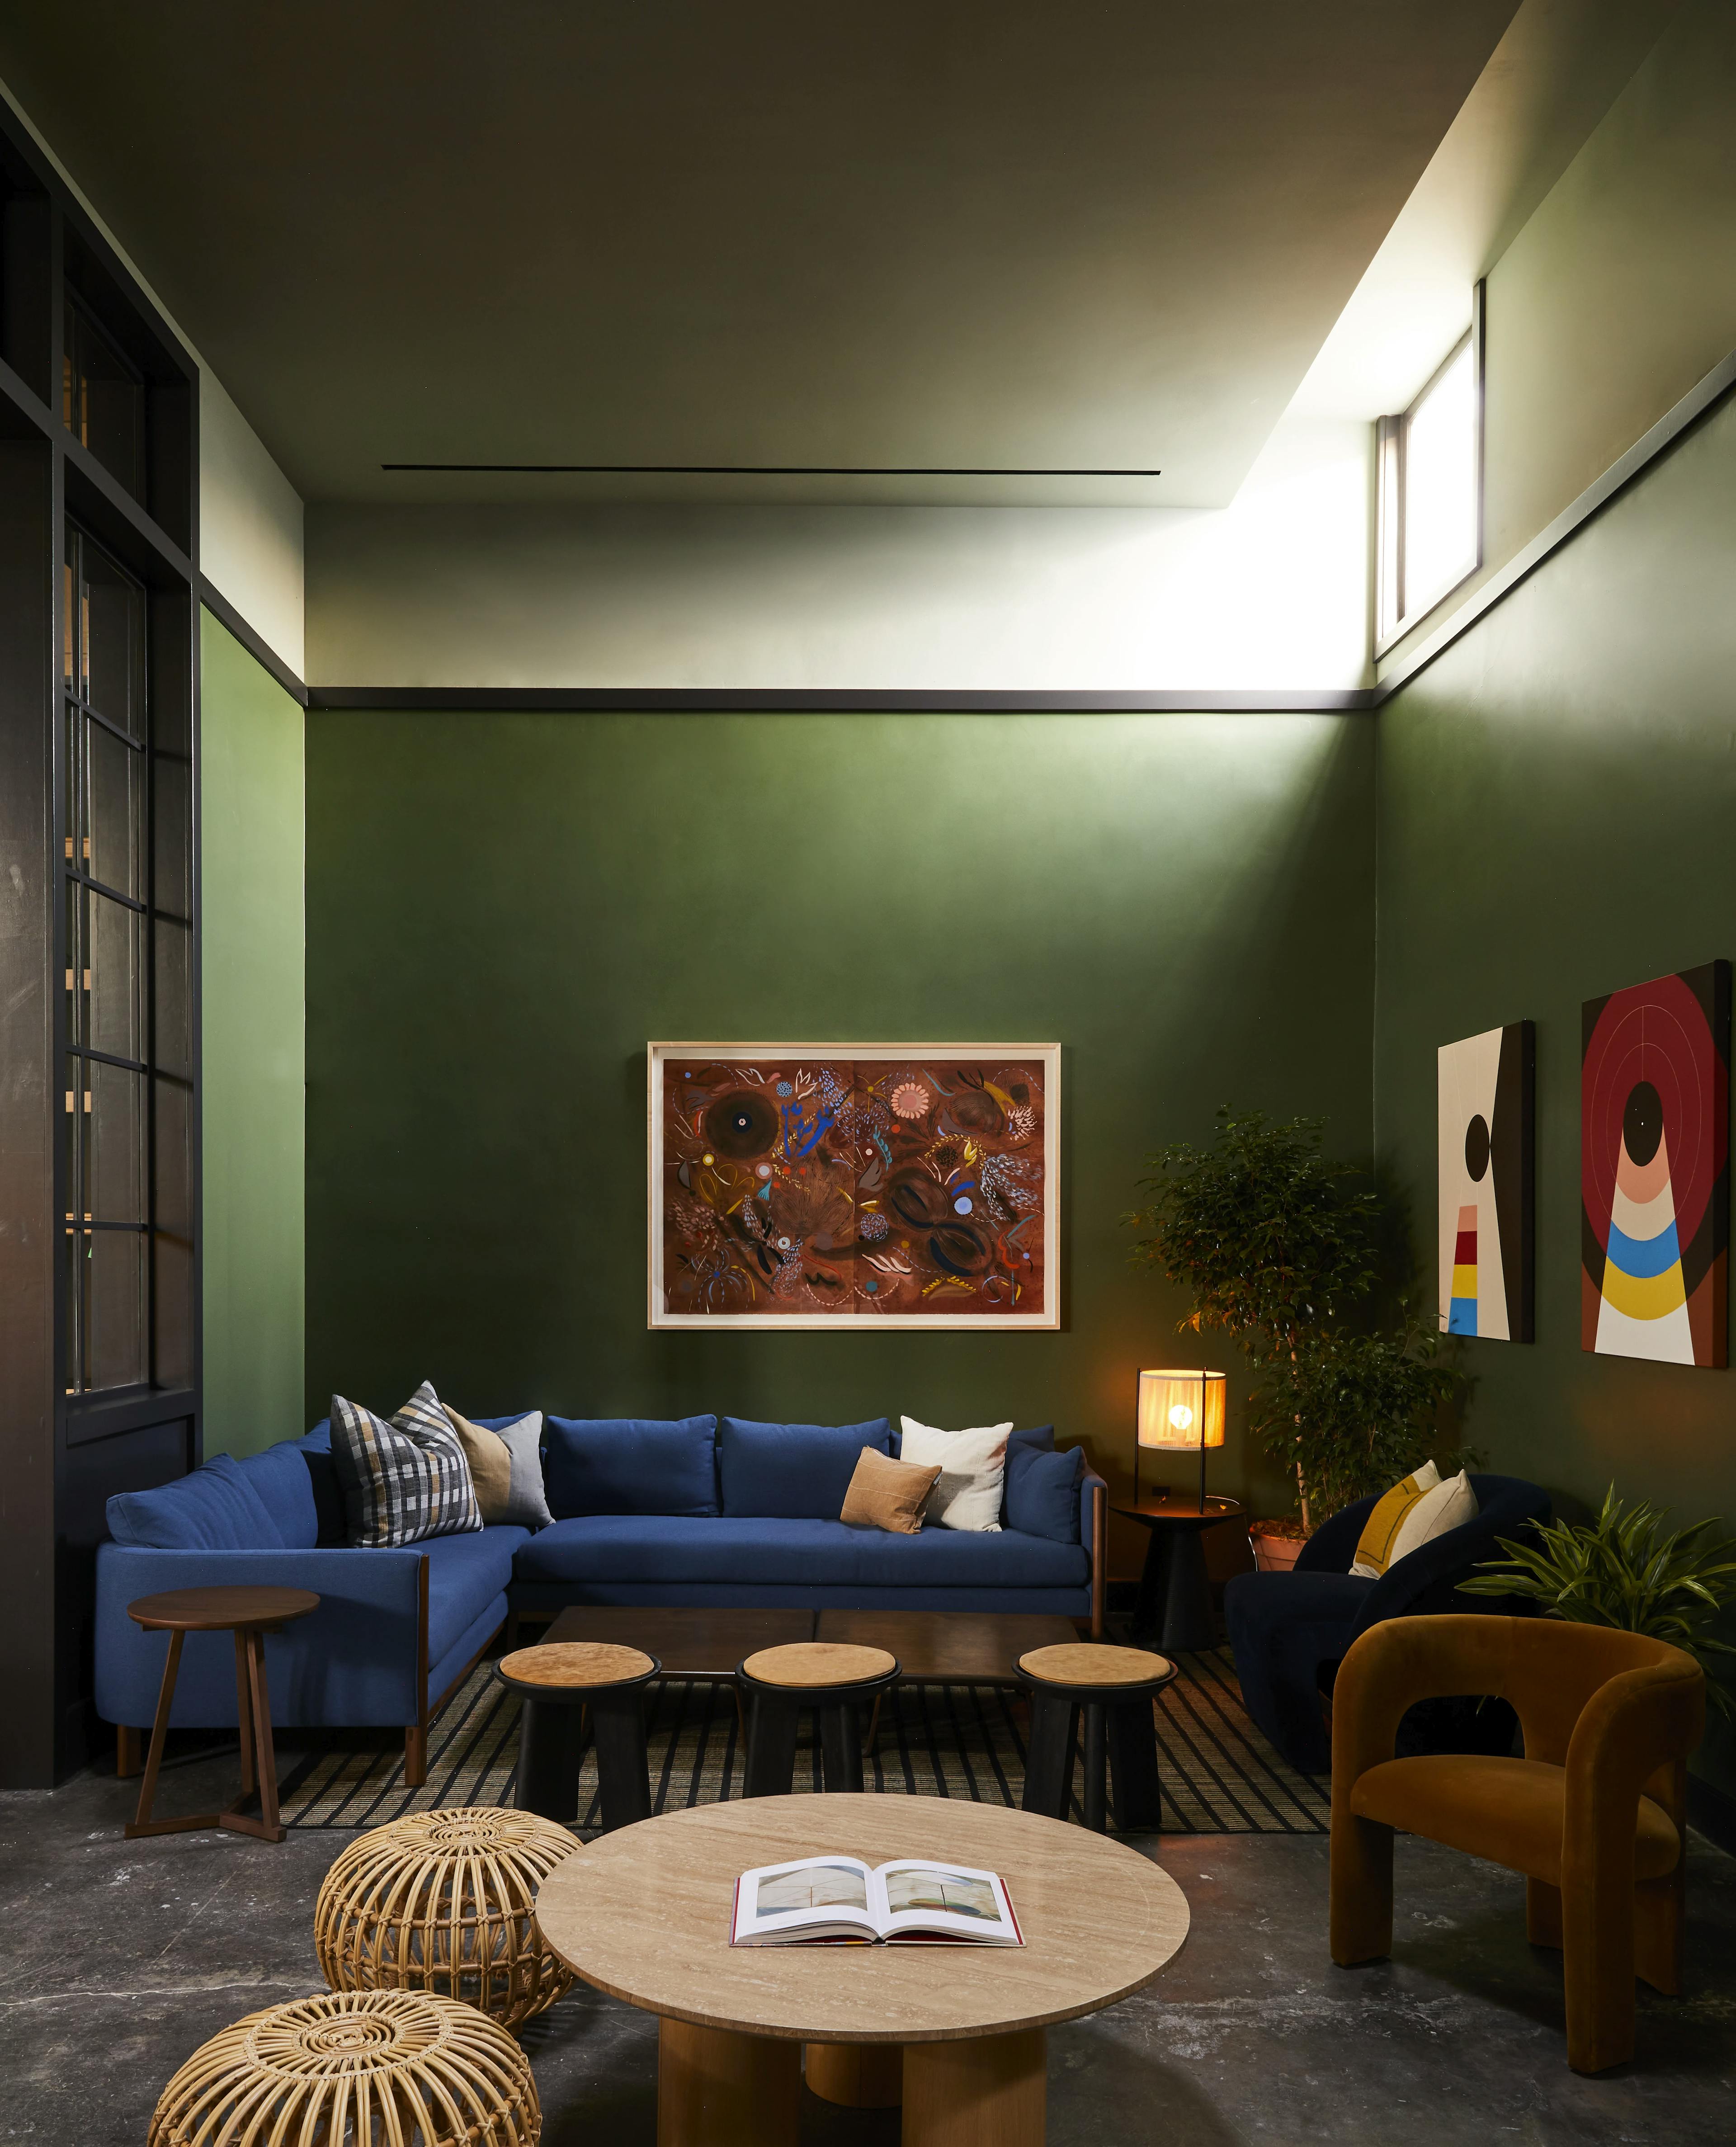 A green lounge area at the Chief Los Angeles Clubhouse, featuring one framed floral artwork by artist Kayla Plosz Antiel and two abstract, geometric paintings by artist Kimmy Quillin installed on the wall.